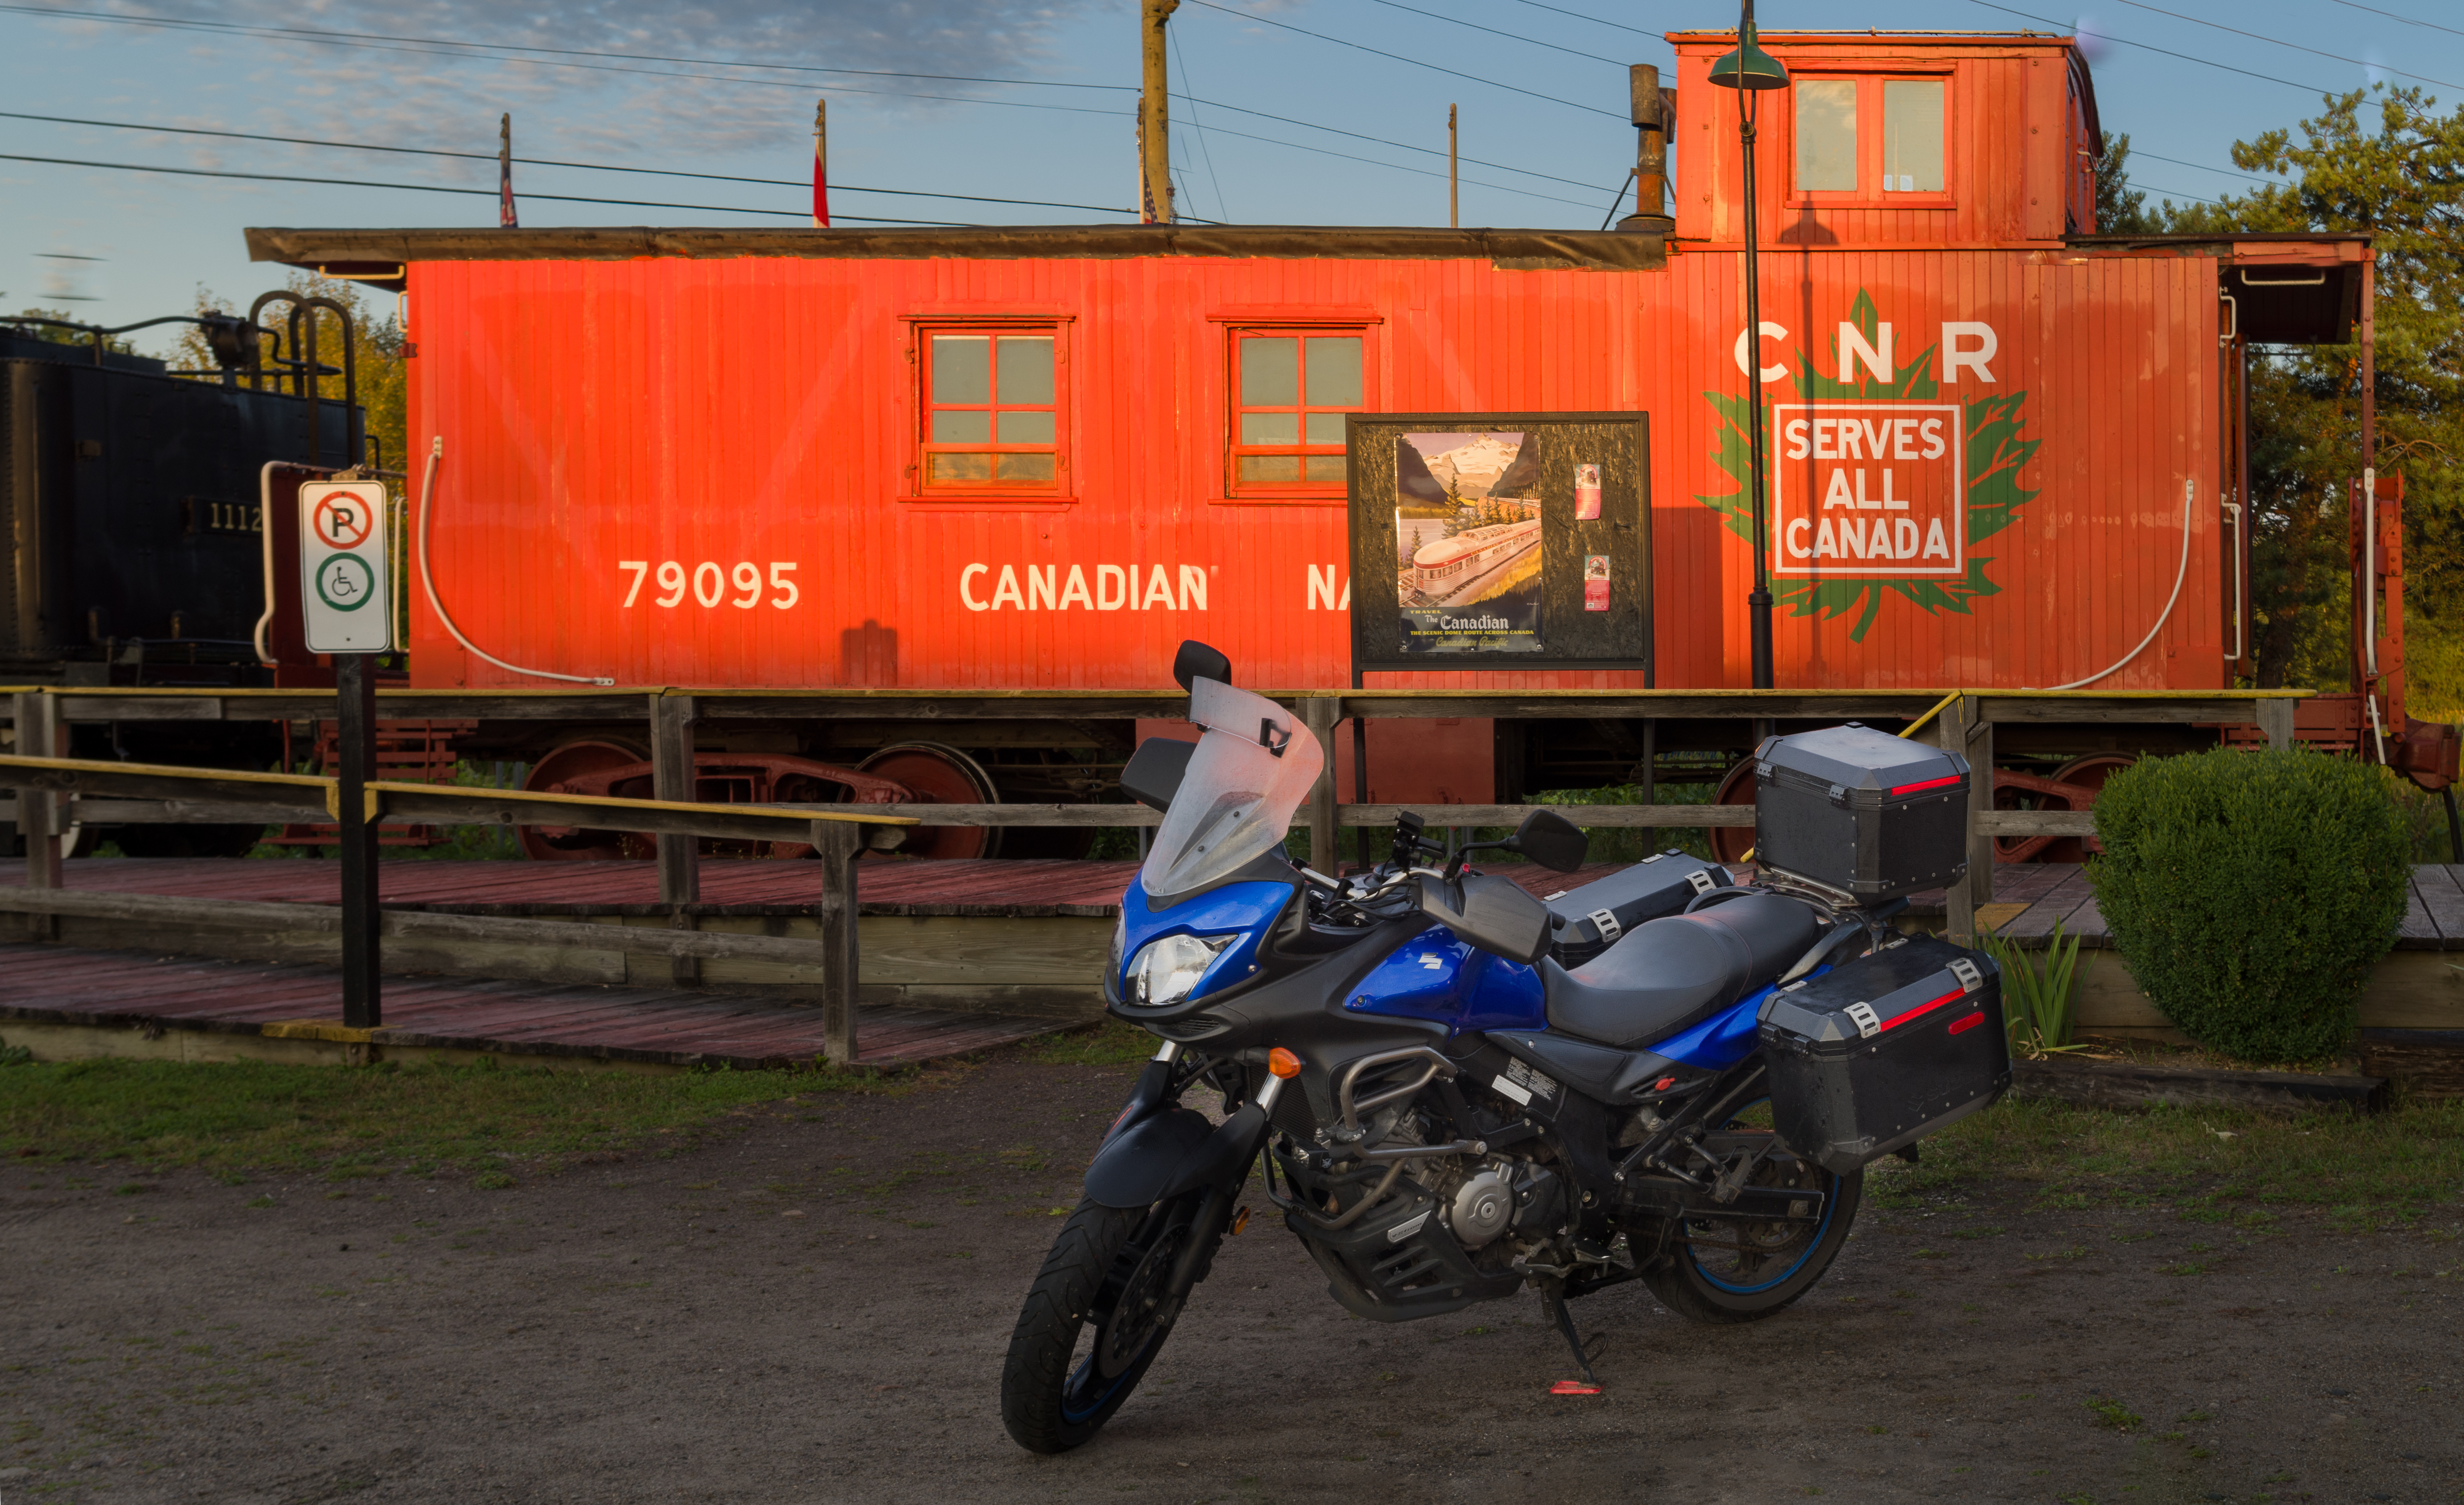 A blue motorcycle parked next to a bright red train caboose car at dusk